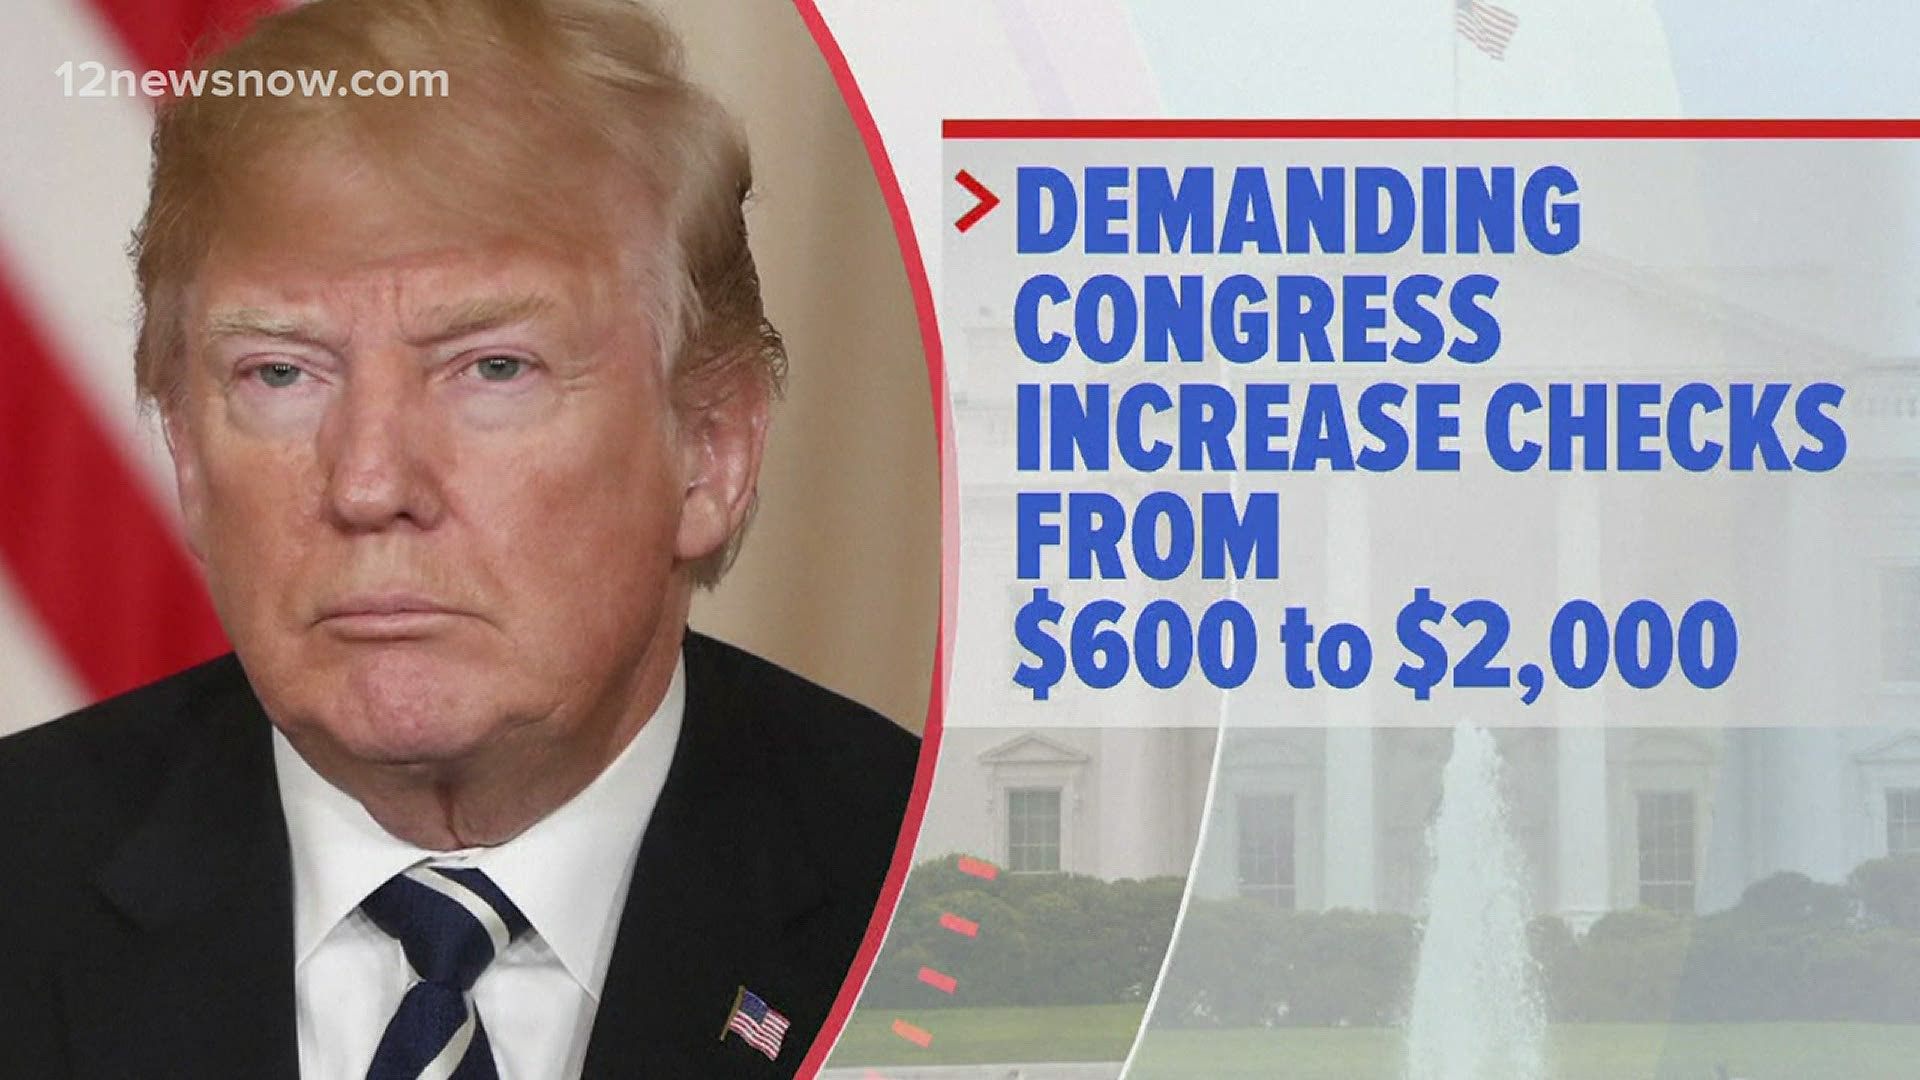 Millions are left waiting for President Trump to sign or veto the latest coronavirus relief package. If not signed, the government would face a shutdown.